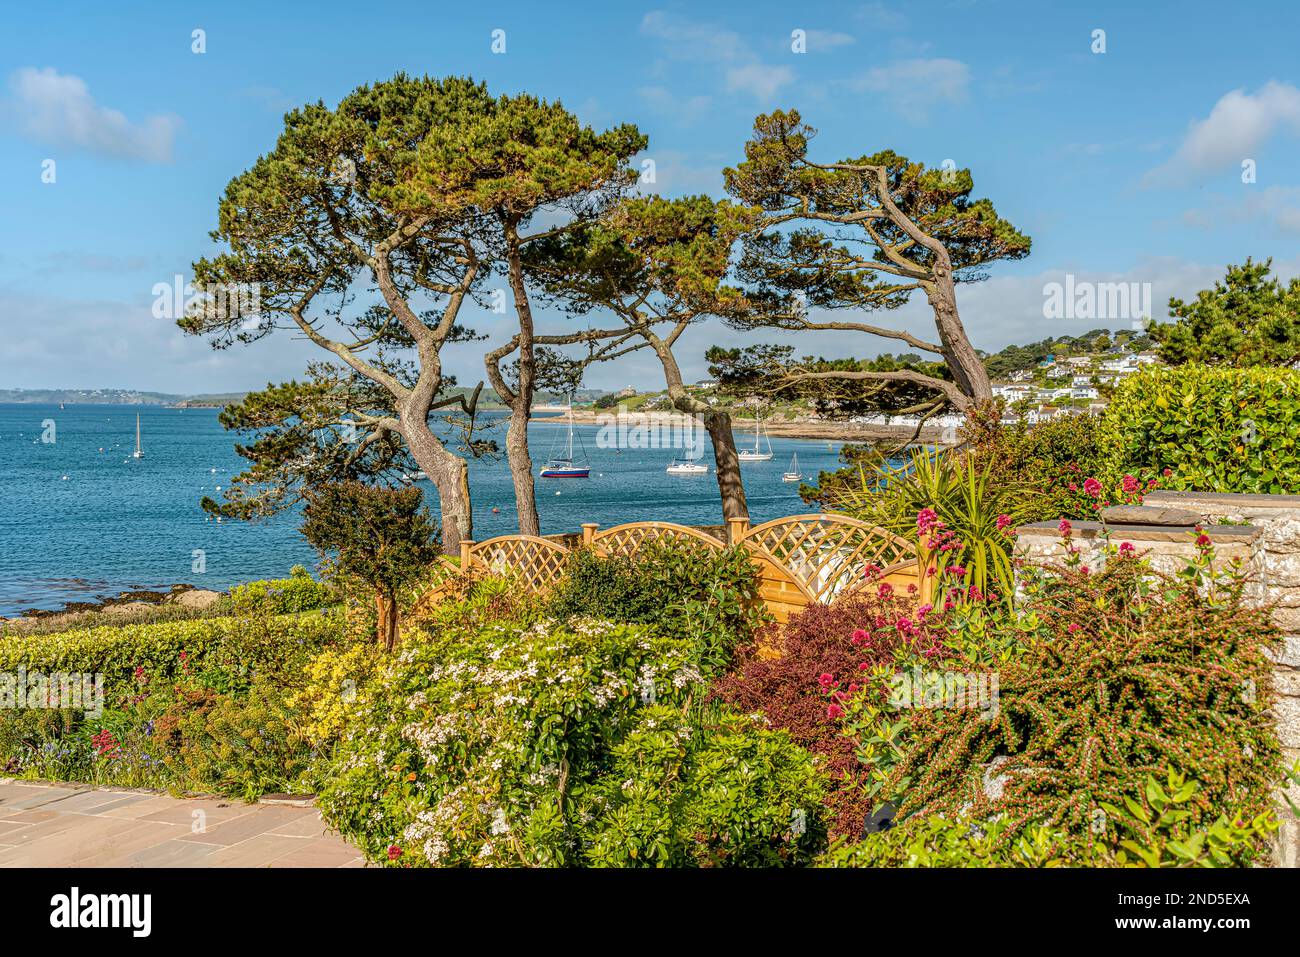 View from a garden across the scenic coastline near the fishing village St.Mawes, Cornwall, England, UK Stock Photo